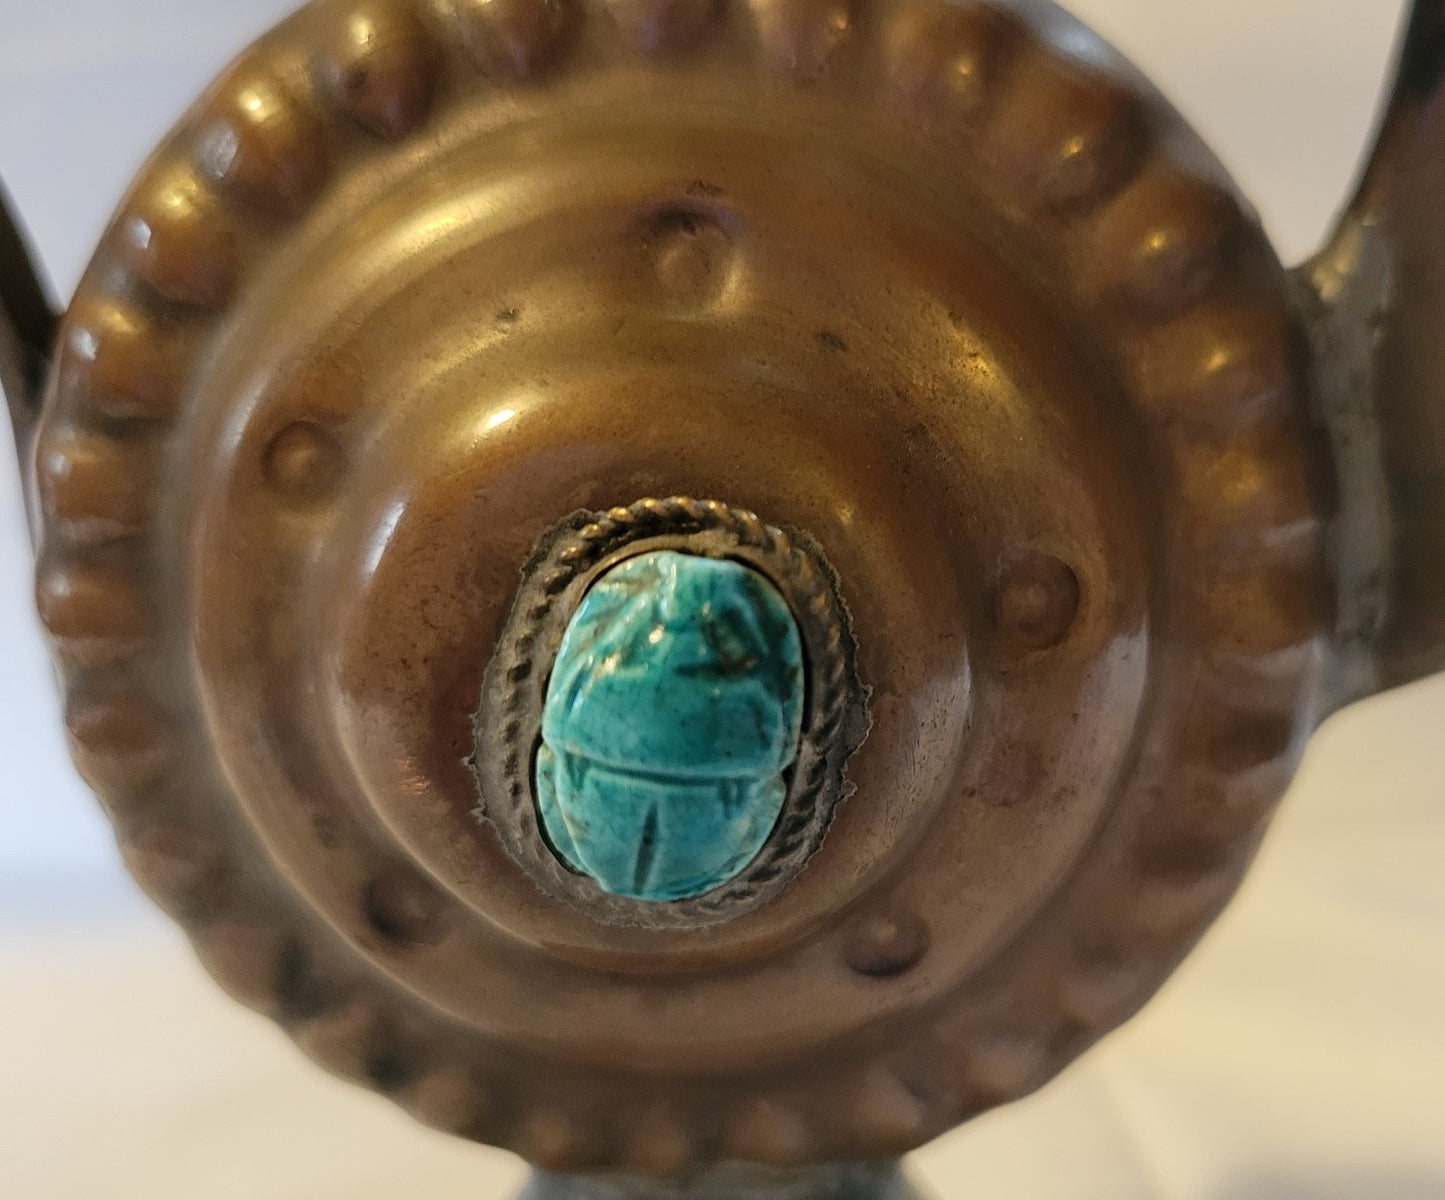 Antique, Egyptian copper kettle with a glazed turquoise scarab beetle on both sides.  The scarab beetle was a symbol of death and rebirth in ancient Egypt. Close-up view of the back scarab beetle.